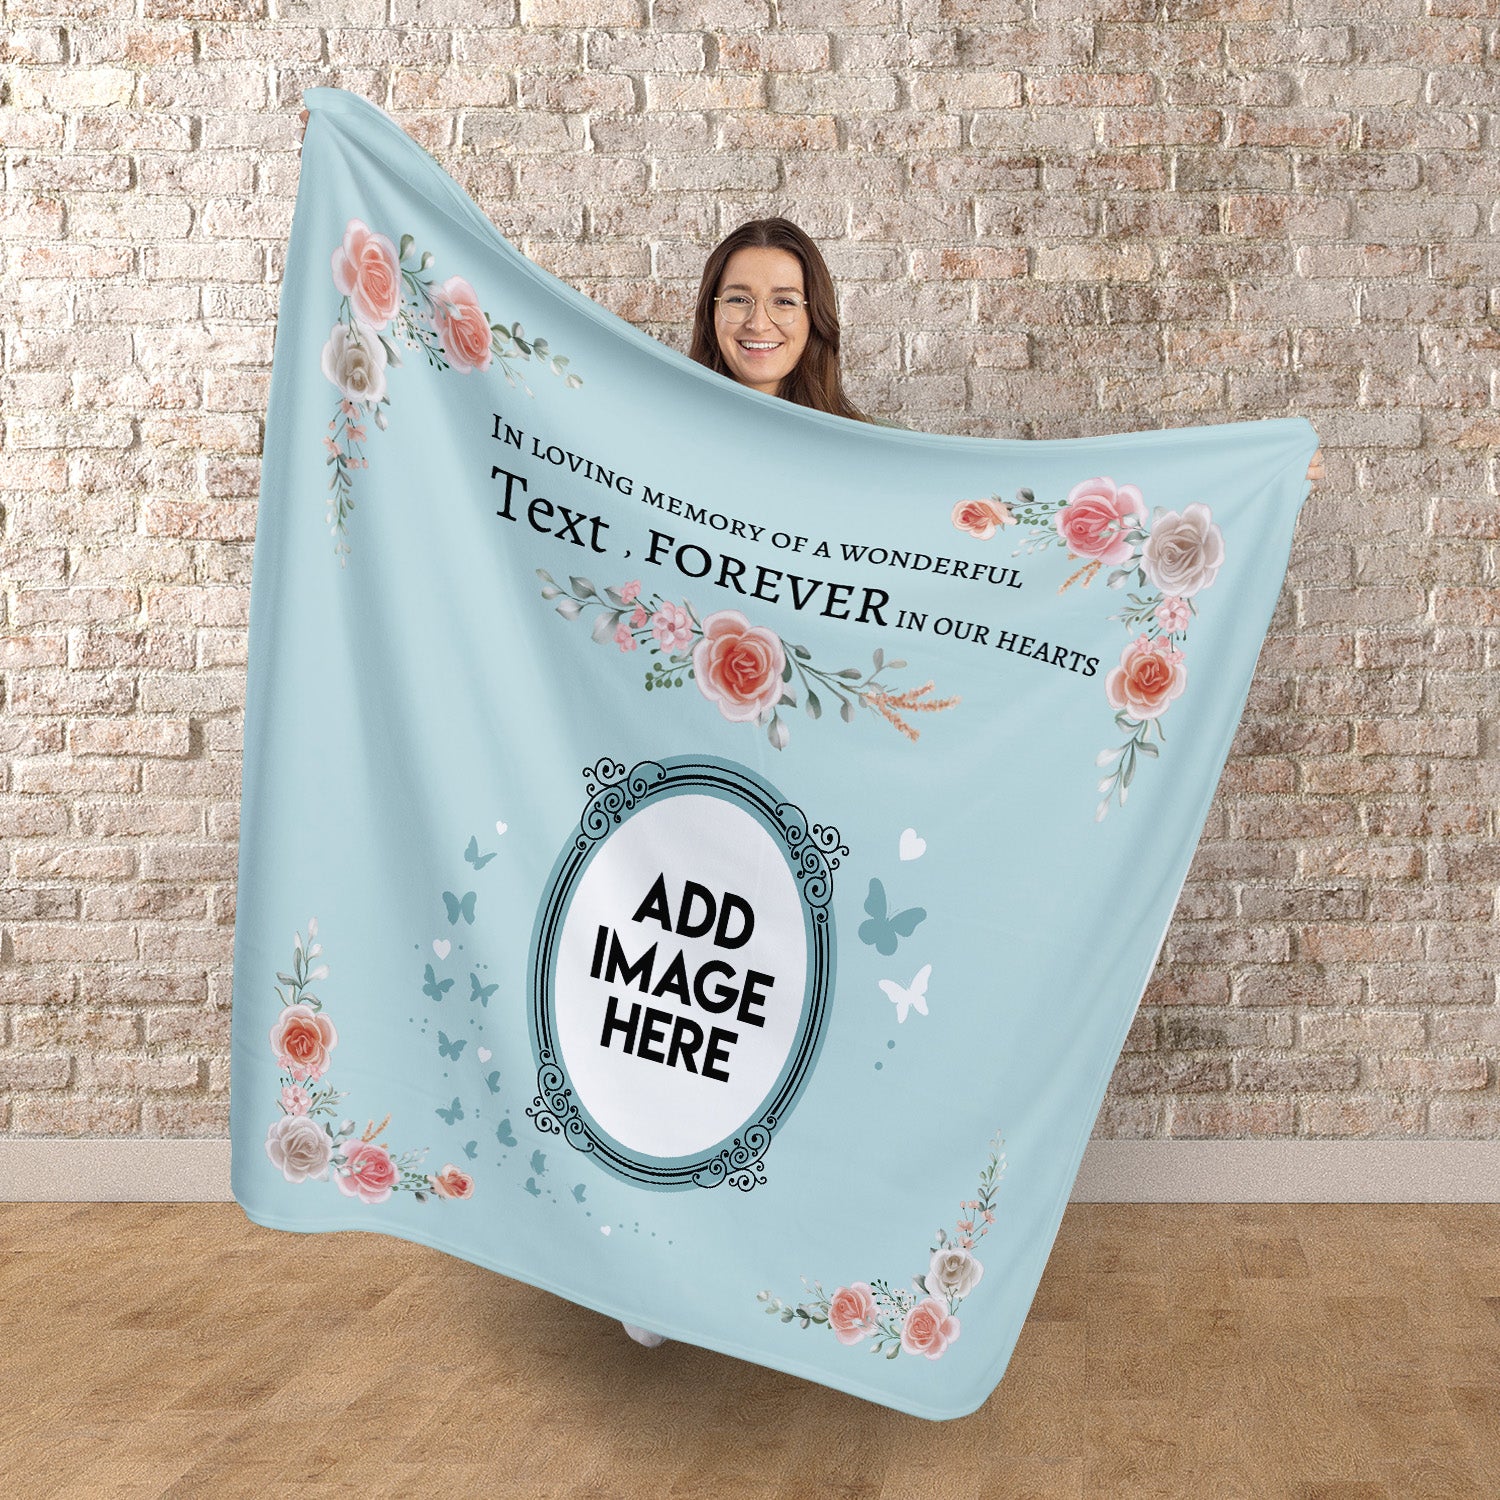 In Our Hearts - Two Colours - Personalised Memory Fleece Blanket 150cm X 150cm